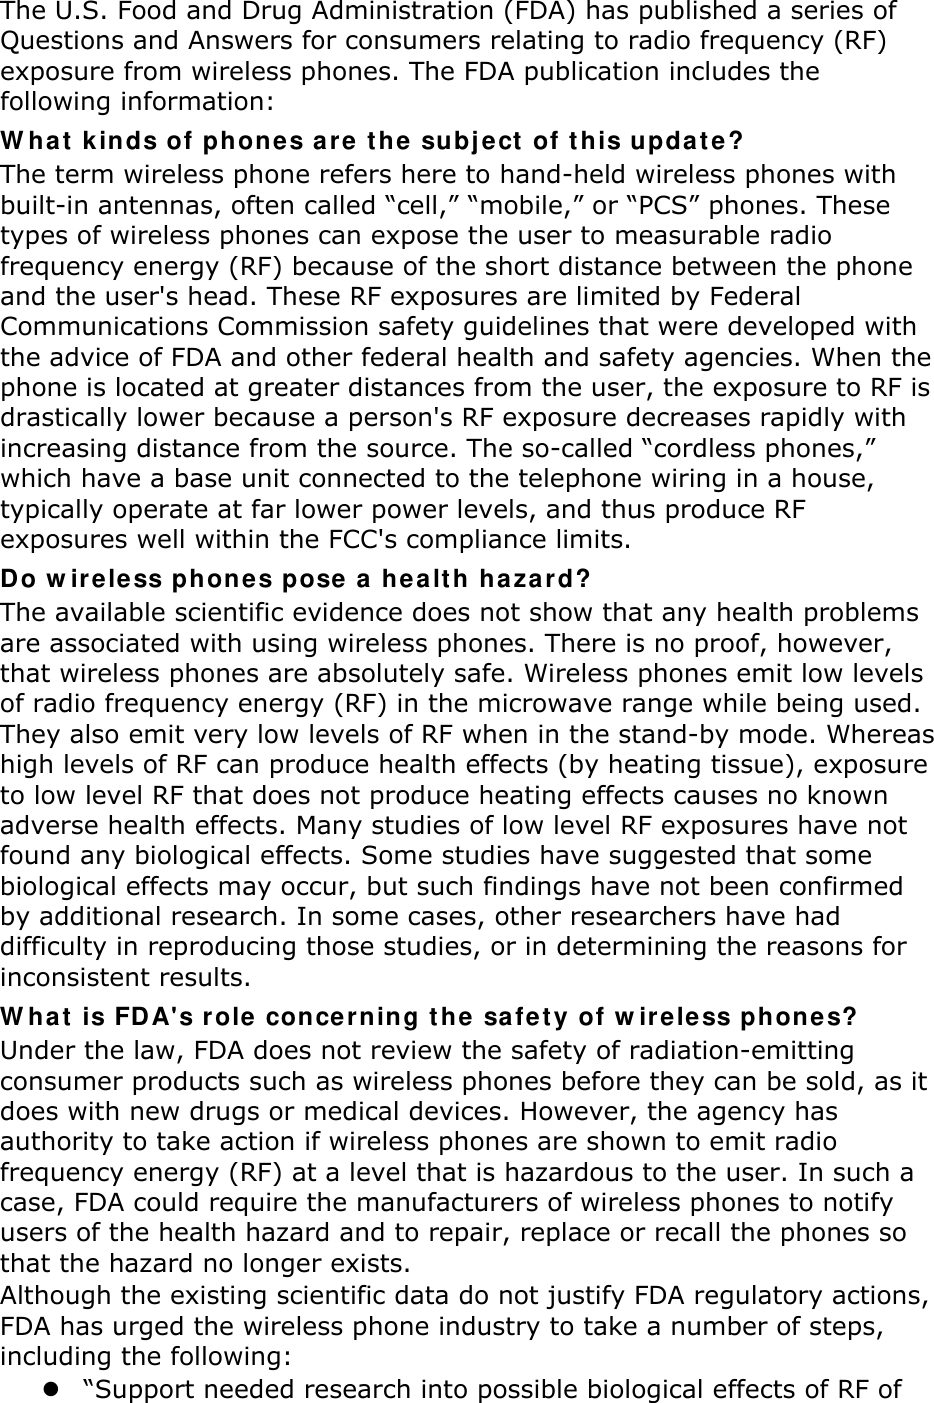 The U.S. Food and Drug Administration (FDA) has published a series of Questions and Answers for consumers relating to radio frequency (RF) exposure from wireless phones. The FDA publication includes the following information: W hat  kinds of ph ones are  t he  subj e ct  of t his updat e ? The term wireless phone refers here to hand-held wireless phones with built-in antennas, often called “cell,” “mobile,” or “PCS” phones. These types of wireless phones can expose the user to measurable radio frequency energy (RF) because of the short distance between the phone and the user&apos;s head. These RF exposures are limited by Federal Communications Commission safety guidelines that were developed with the advice of FDA and other federal health and safety agencies. When the phone is located at greater distances from the user, the exposure to RF is drastically lower because a person&apos;s RF exposure decreases rapidly with increasing distance from the source. The so-called “cordless phones,” which have a base unit connected to the telephone wiring in a house, typically operate at far lower power levels, and thus produce RF exposures well within the FCC&apos;s compliance limits. Do w ireless phones pose  a hea lt h ha za rd? The available scientific evidence does not show that any health problems are associated with using wireless phones. There is no proof, however, that wireless phones are absolutely safe. Wireless phones emit low levels of radio frequency energy (RF) in the microwave range while being used. They also emit very low levels of RF when in the stand-by mode. Whereas high levels of RF can produce health effects (by heating tissue), exposure to low level RF that does not produce heating effects causes no known adverse health effects. Many studies of low level RF exposures have not found any biological effects. Some studies have suggested that some biological effects may occur, but such findings have not been confirmed by additional research. In some cases, other researchers have had difficulty in reproducing those studies, or in determining the reasons for inconsistent results. W hat  is FD A&apos;s r ole concerning t he  sa fe t y of w ireless phon e s? Under the law, FDA does not review the safety of radiation-emitting consumer products such as wireless phones before they can be sold, as it does with new drugs or medical devices. However, the agency has authority to take action if wireless phones are shown to emit radio frequency energy (RF) at a level that is hazardous to the user. In such a case, FDA could require the manufacturers of wireless phones to notify users of the health hazard and to repair, replace or recall the phones so that the hazard no longer exists. Although the existing scientific data do not justify FDA regulatory actions, FDA has urged the wireless phone industry to take a number of steps, including the following:  “Support needed research into possible biological effects of RF of 